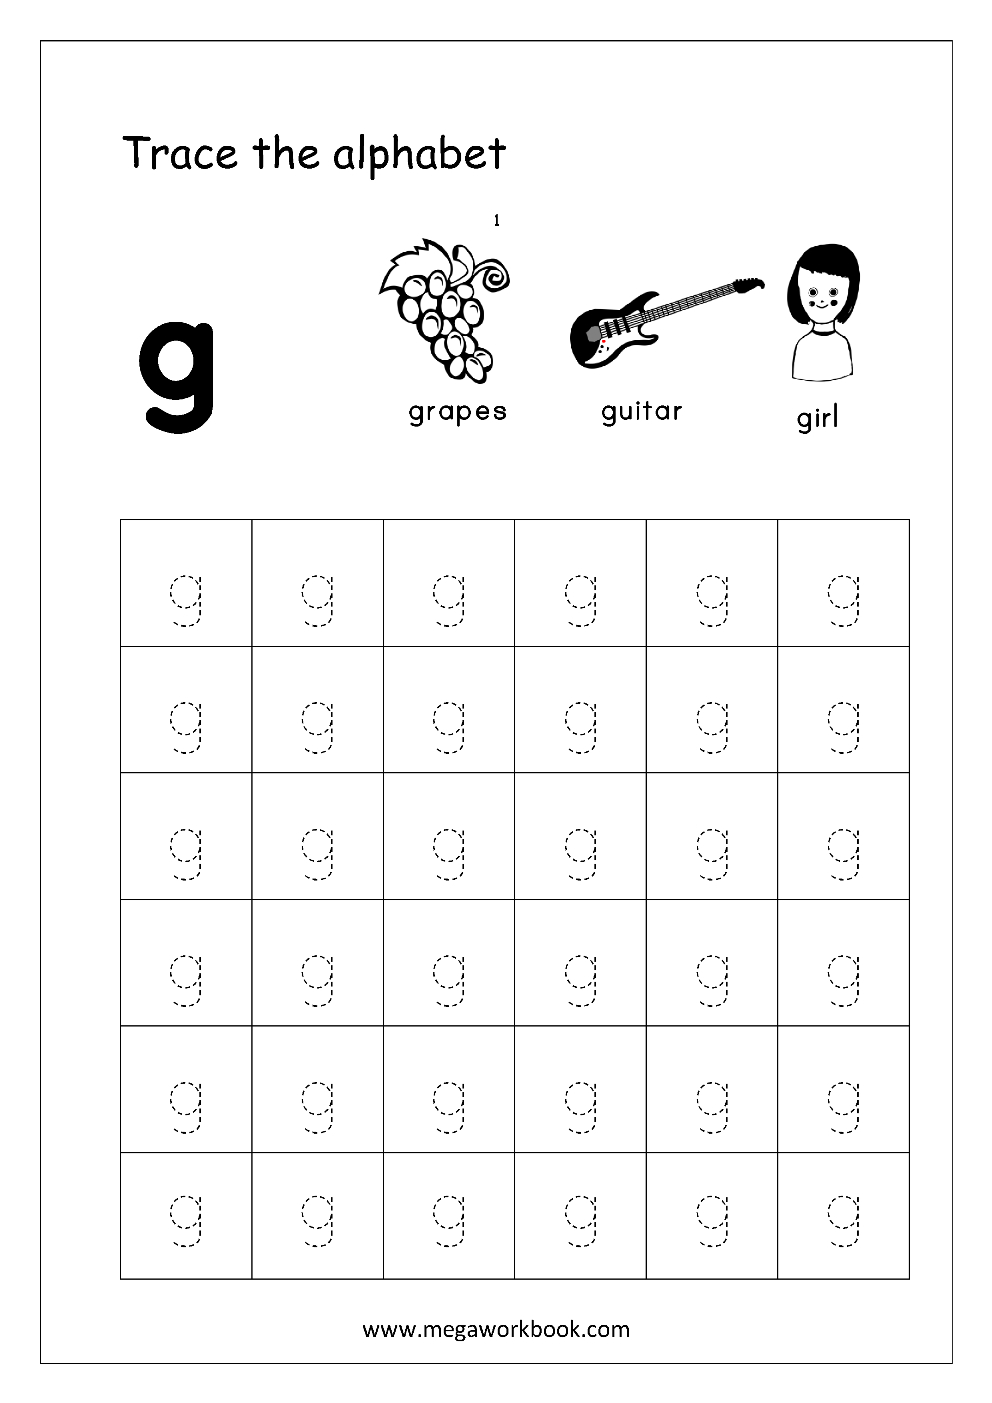 Free English Worksheets - Alphabet Tracing (Small Letters) - Letter - Free Printable Worksheets For Kg1